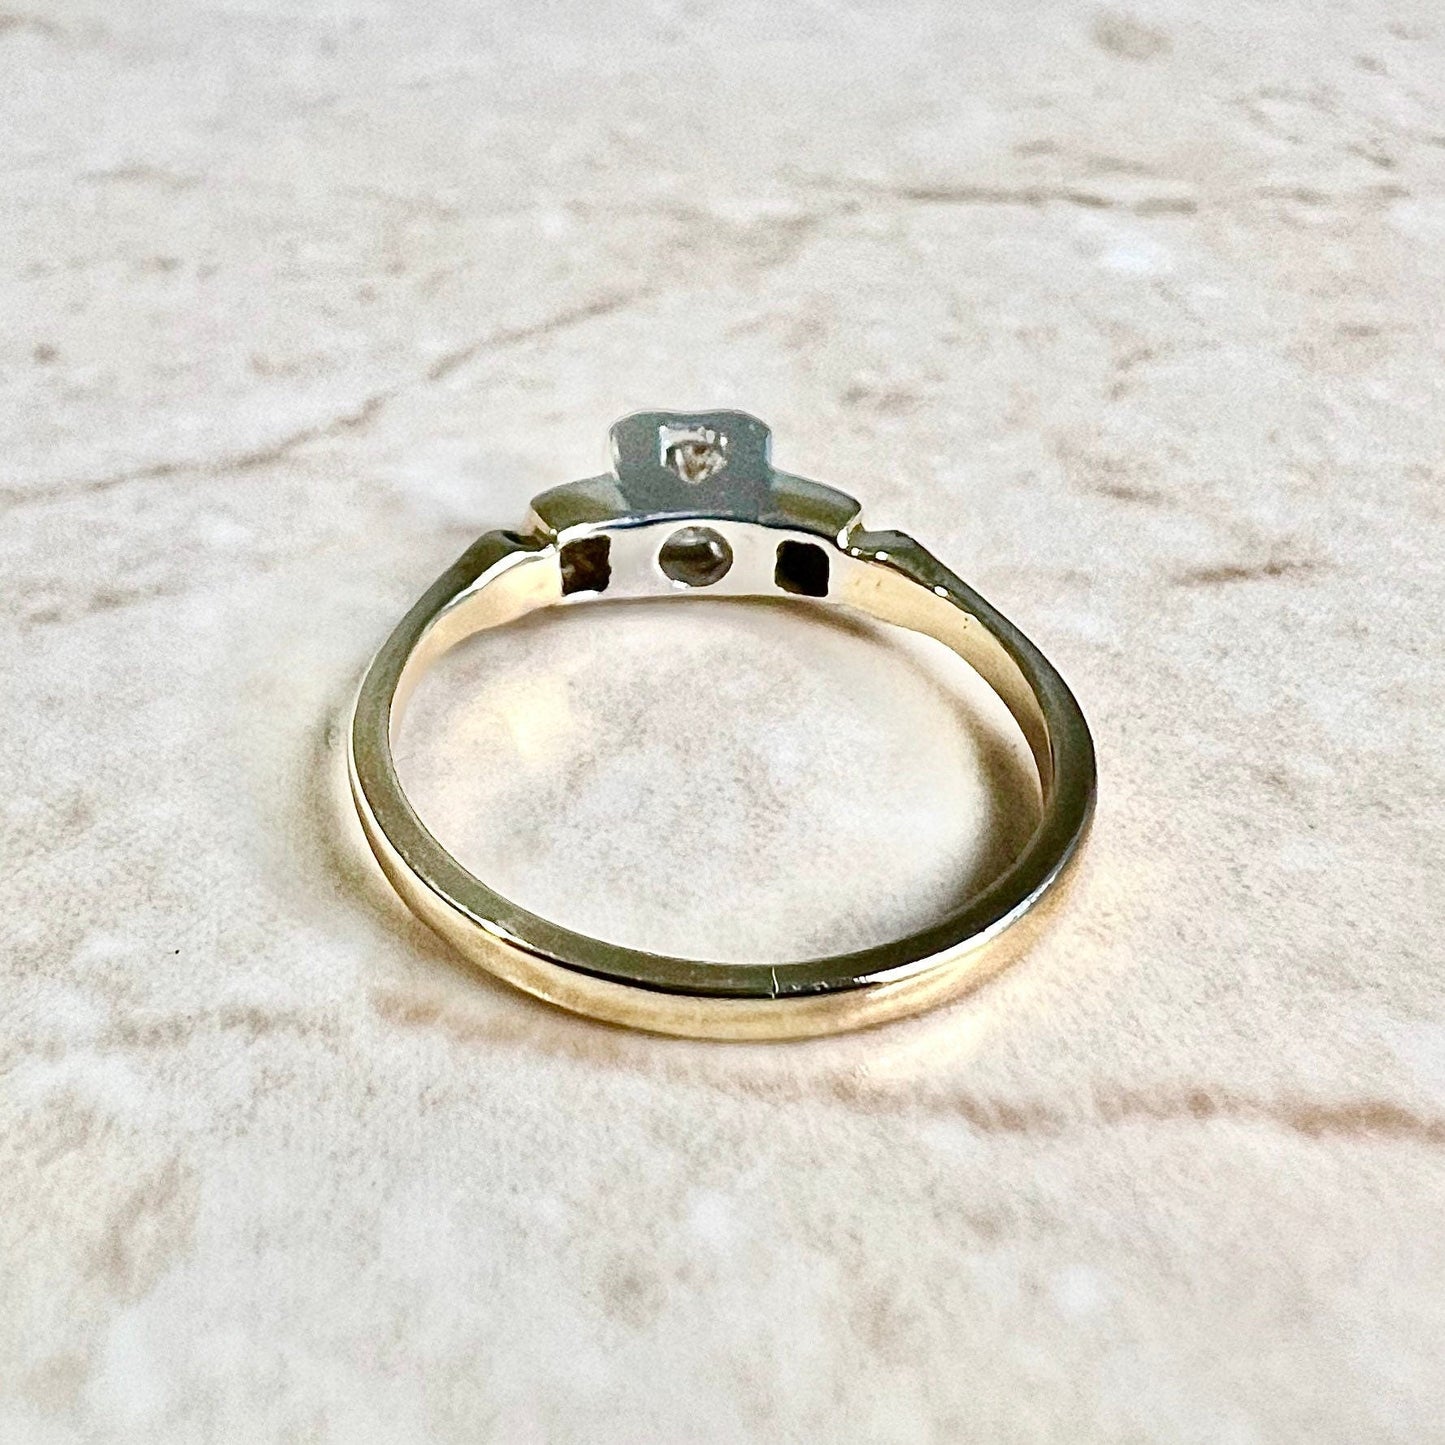 Vintage Retro Diamond Engagement Ring Circa 1940 - 14K Two Tone Gold Ring - Vintage Solitaire - Diamond Solitaire Ring- 3 Stone Wedding Ring